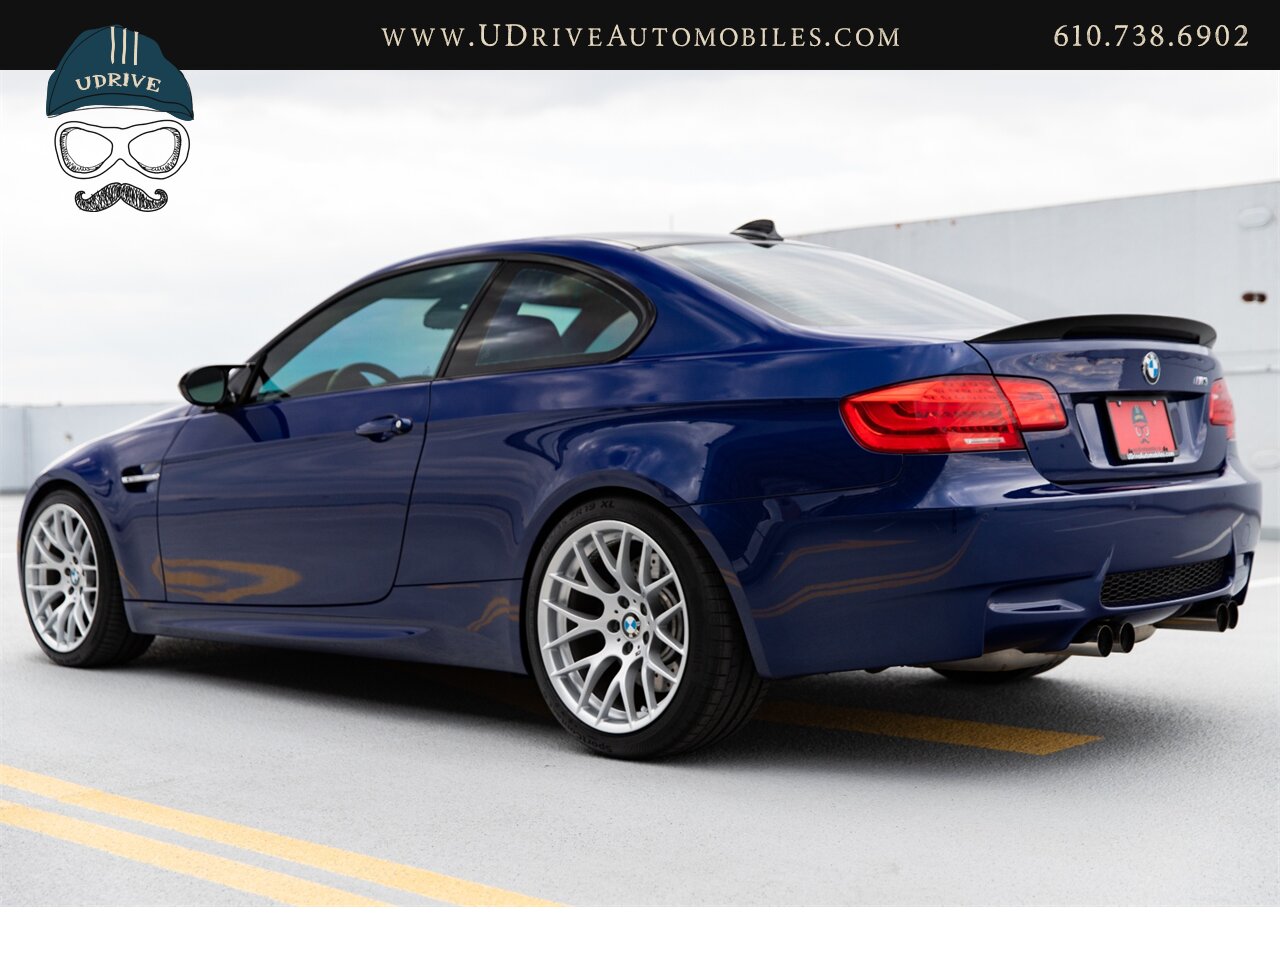 2011 BMW M3 E92 6 Speed Manual Competition Pkg Interlagos Blue  16k Miles Nav PDC EDC Comf Acc - Photo 23 - West Chester, PA 19382